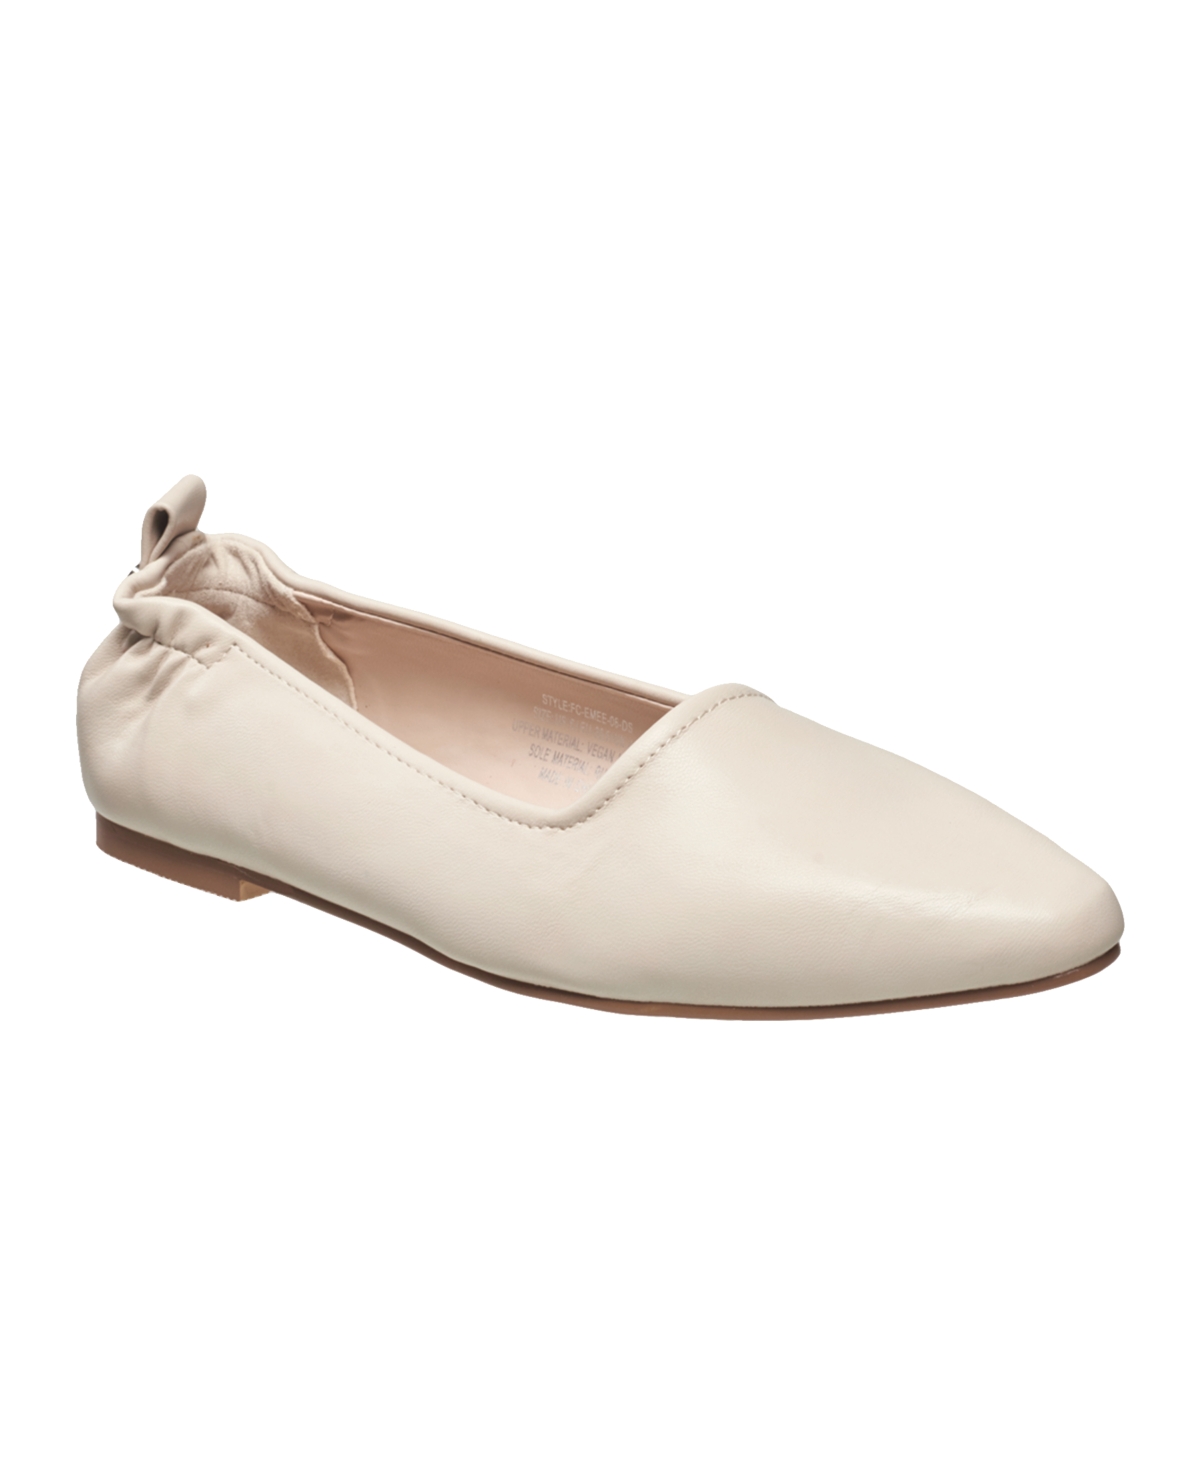 Women's Emee Rouched Back Ballet Flats - Beige- Faux Leather